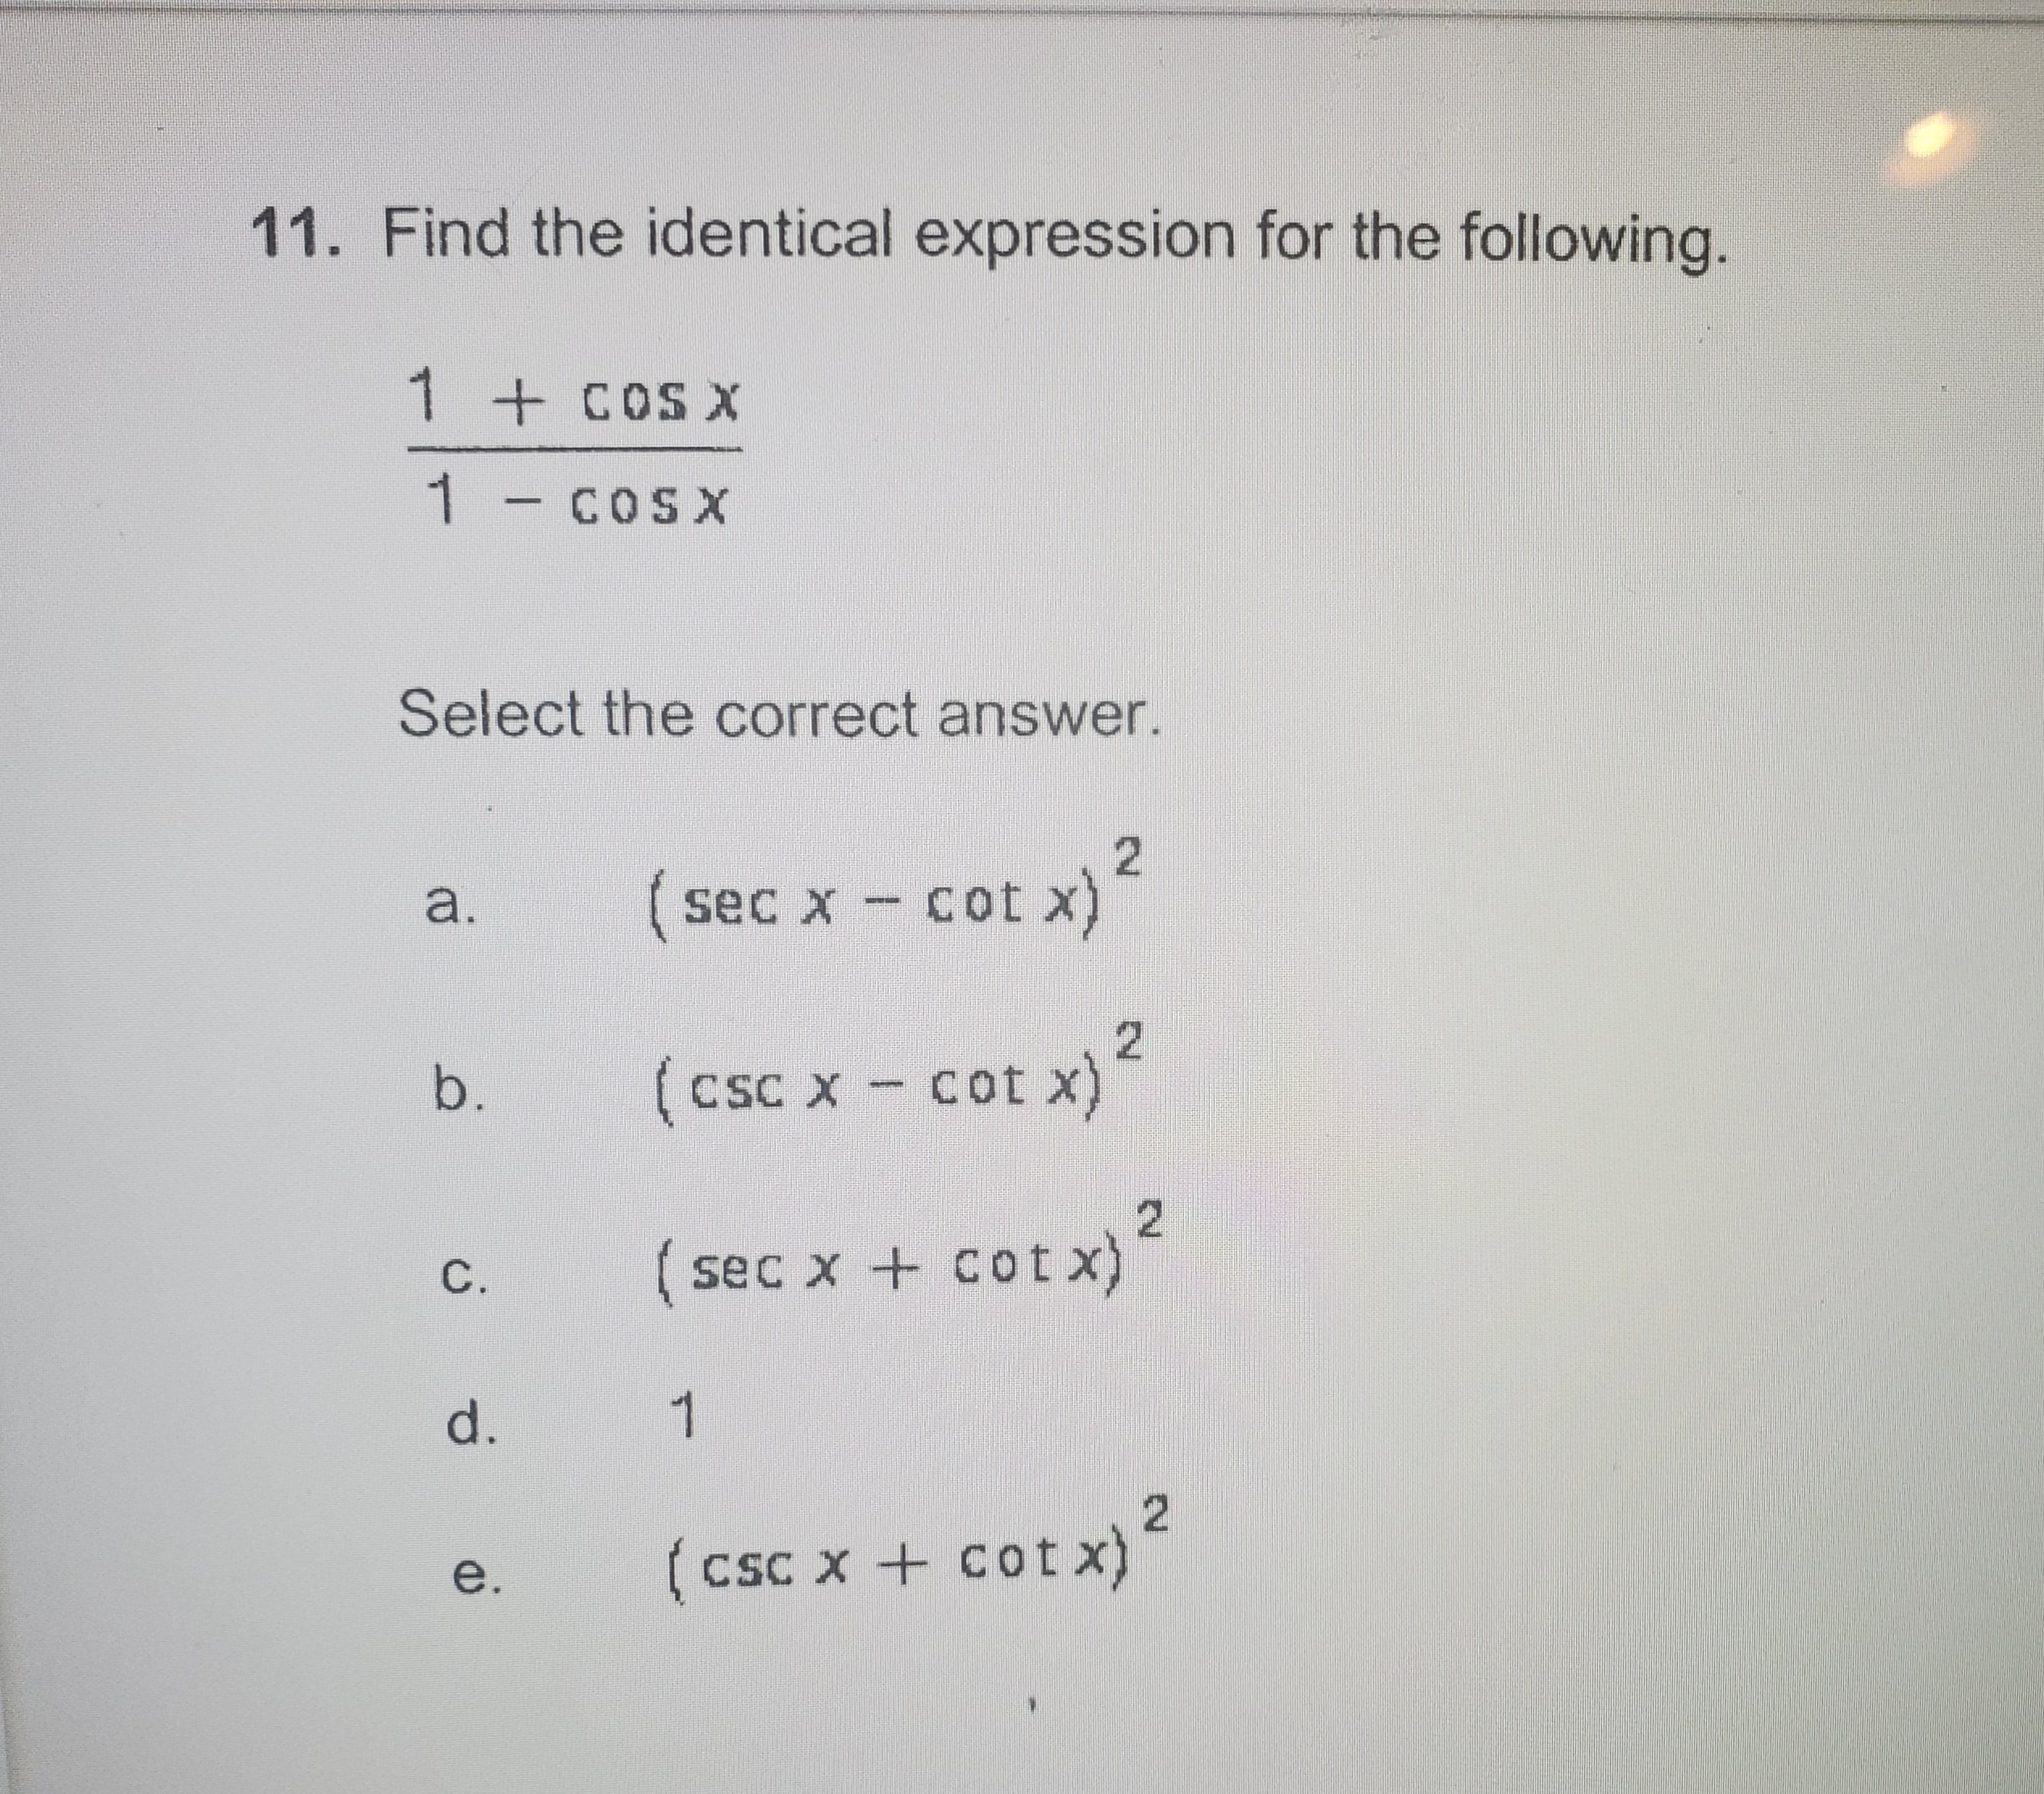 11. Find the identical expression for the following.
1 + COS X
1 - COsx
Select the correct answer.
a.
( sec x - Cot x)
(csc x - cot x)?
b.
CSC
C.
( sec x + cot x)
d.
1
(csc x + cot x)
e.
